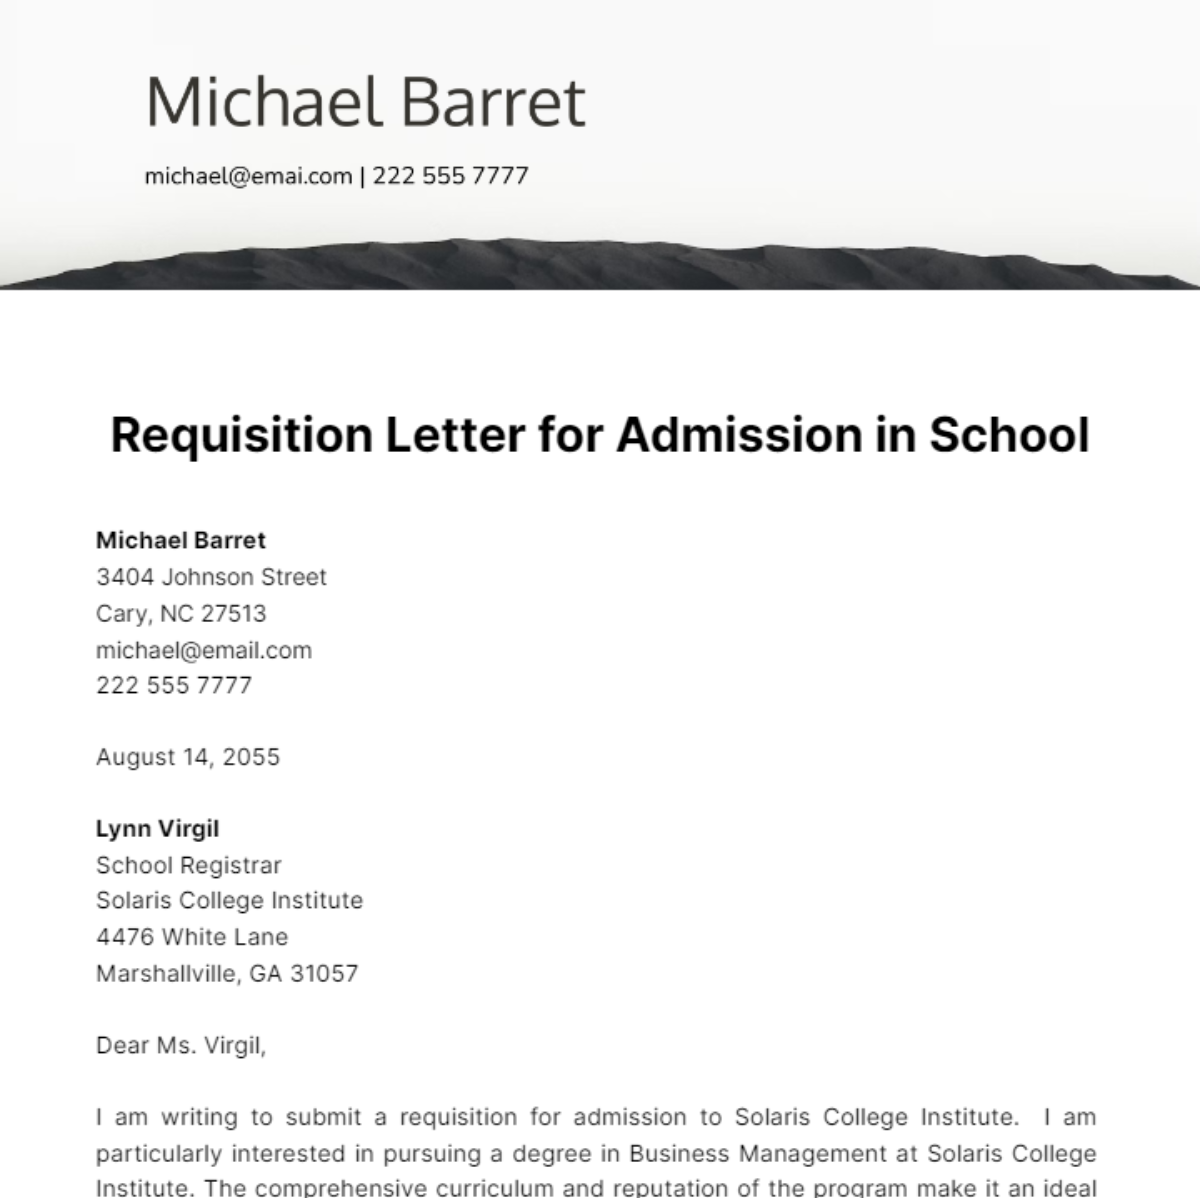 Requisition Letter for Admission in School Template